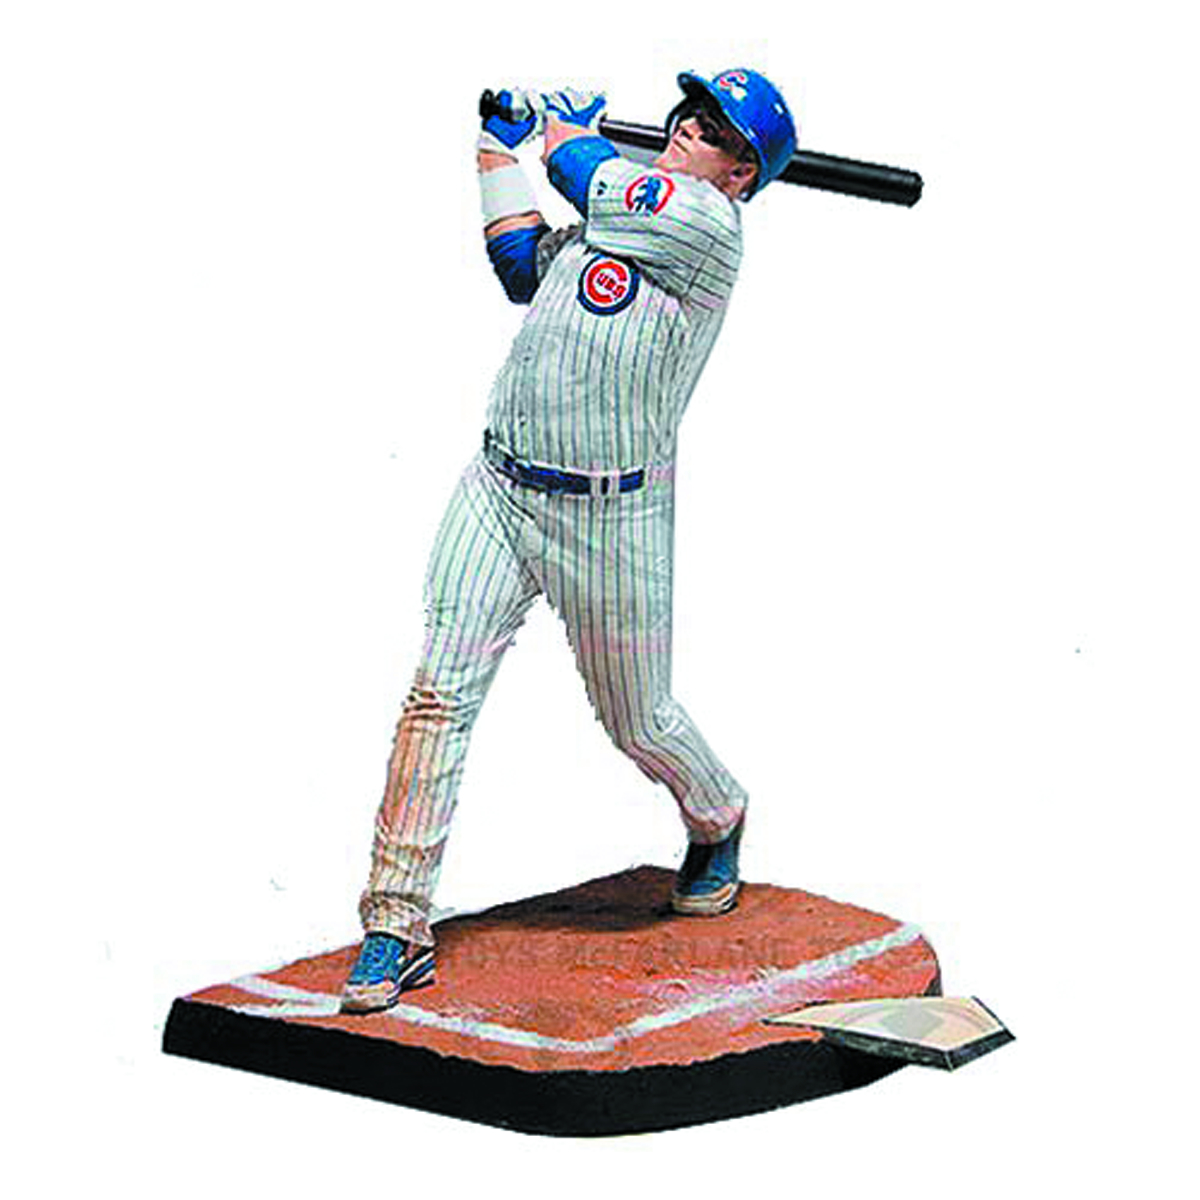 TMP MLB SERIES 33 ANTHONY RIZZO AF CASE